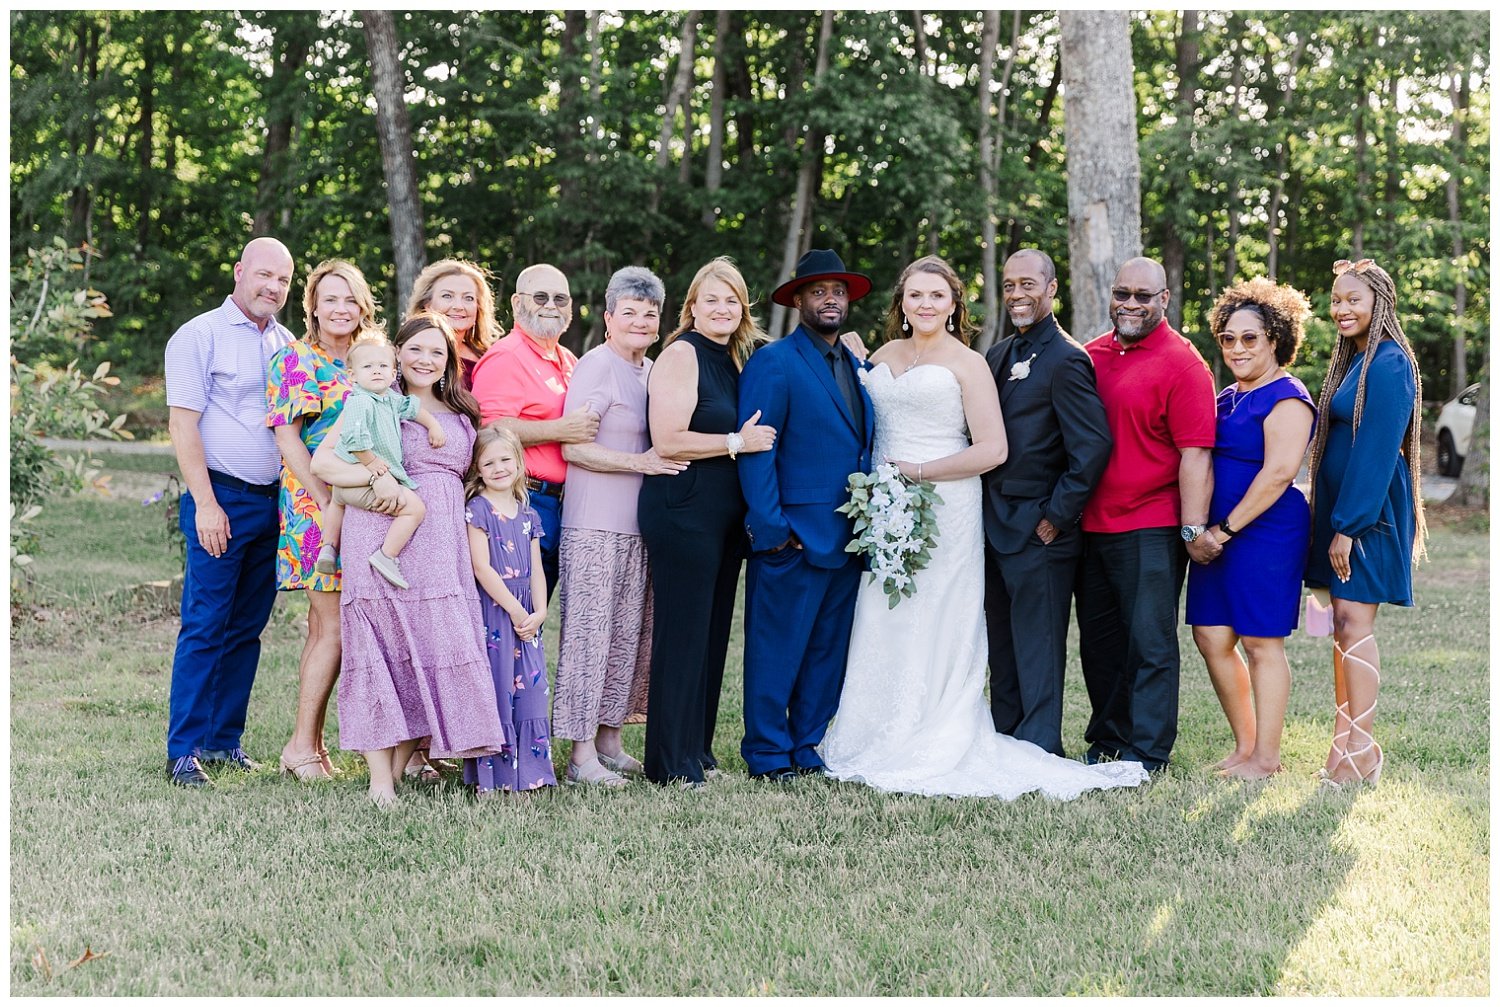 large family posing with bride and groom at wedding